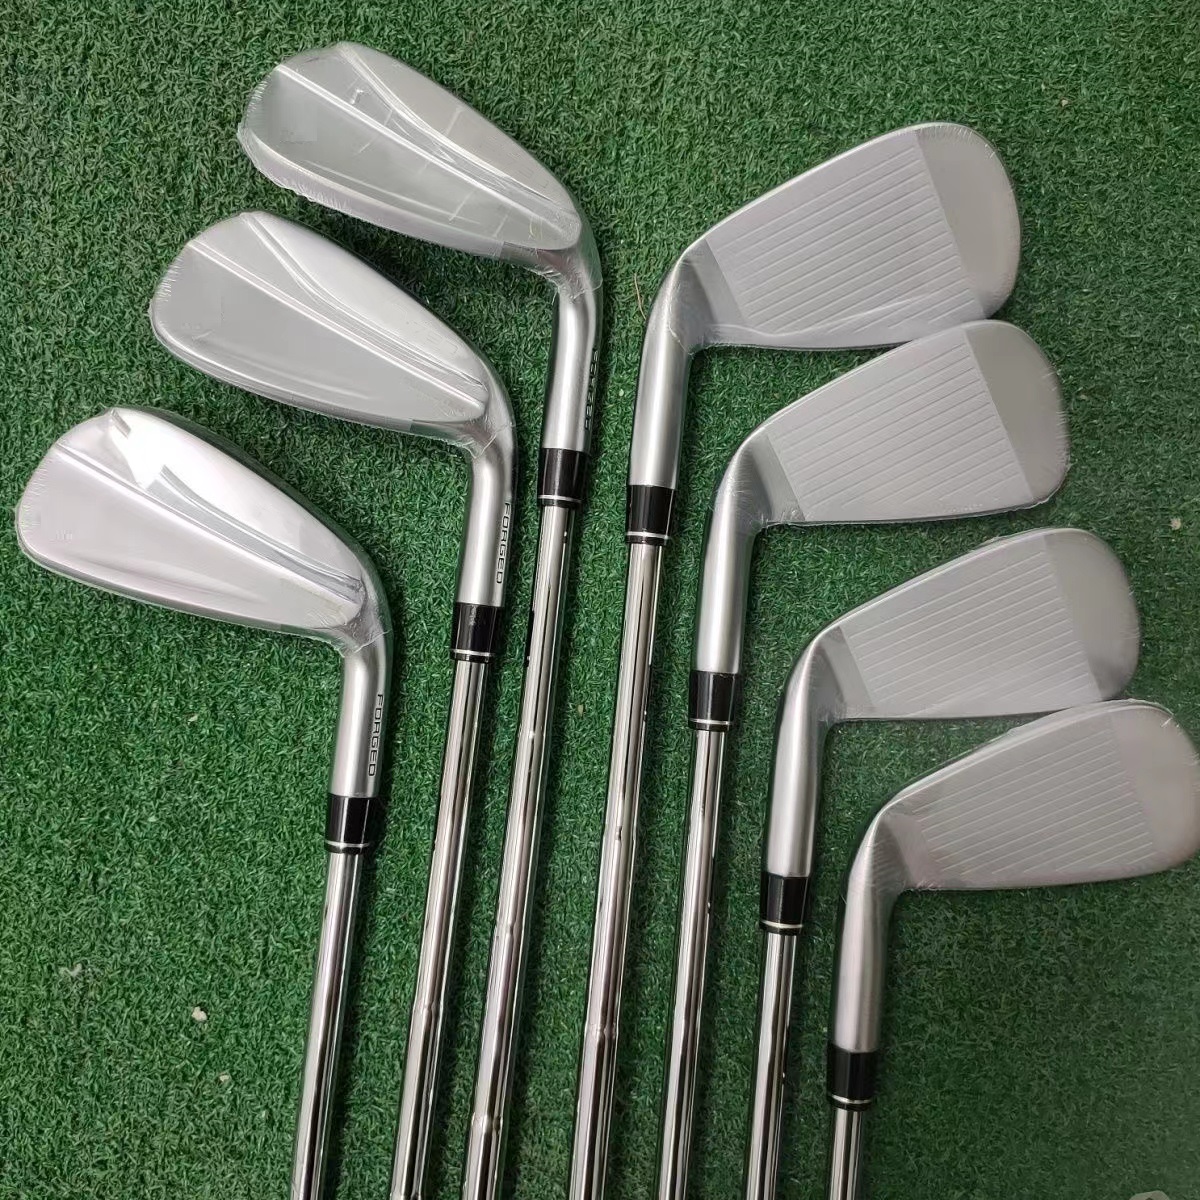 

Forged Golf Clubs Iron set P90 R/S Graphite/Steel Shafts With Headcover Real Photos Contact Seller UPS DHL FEDEX